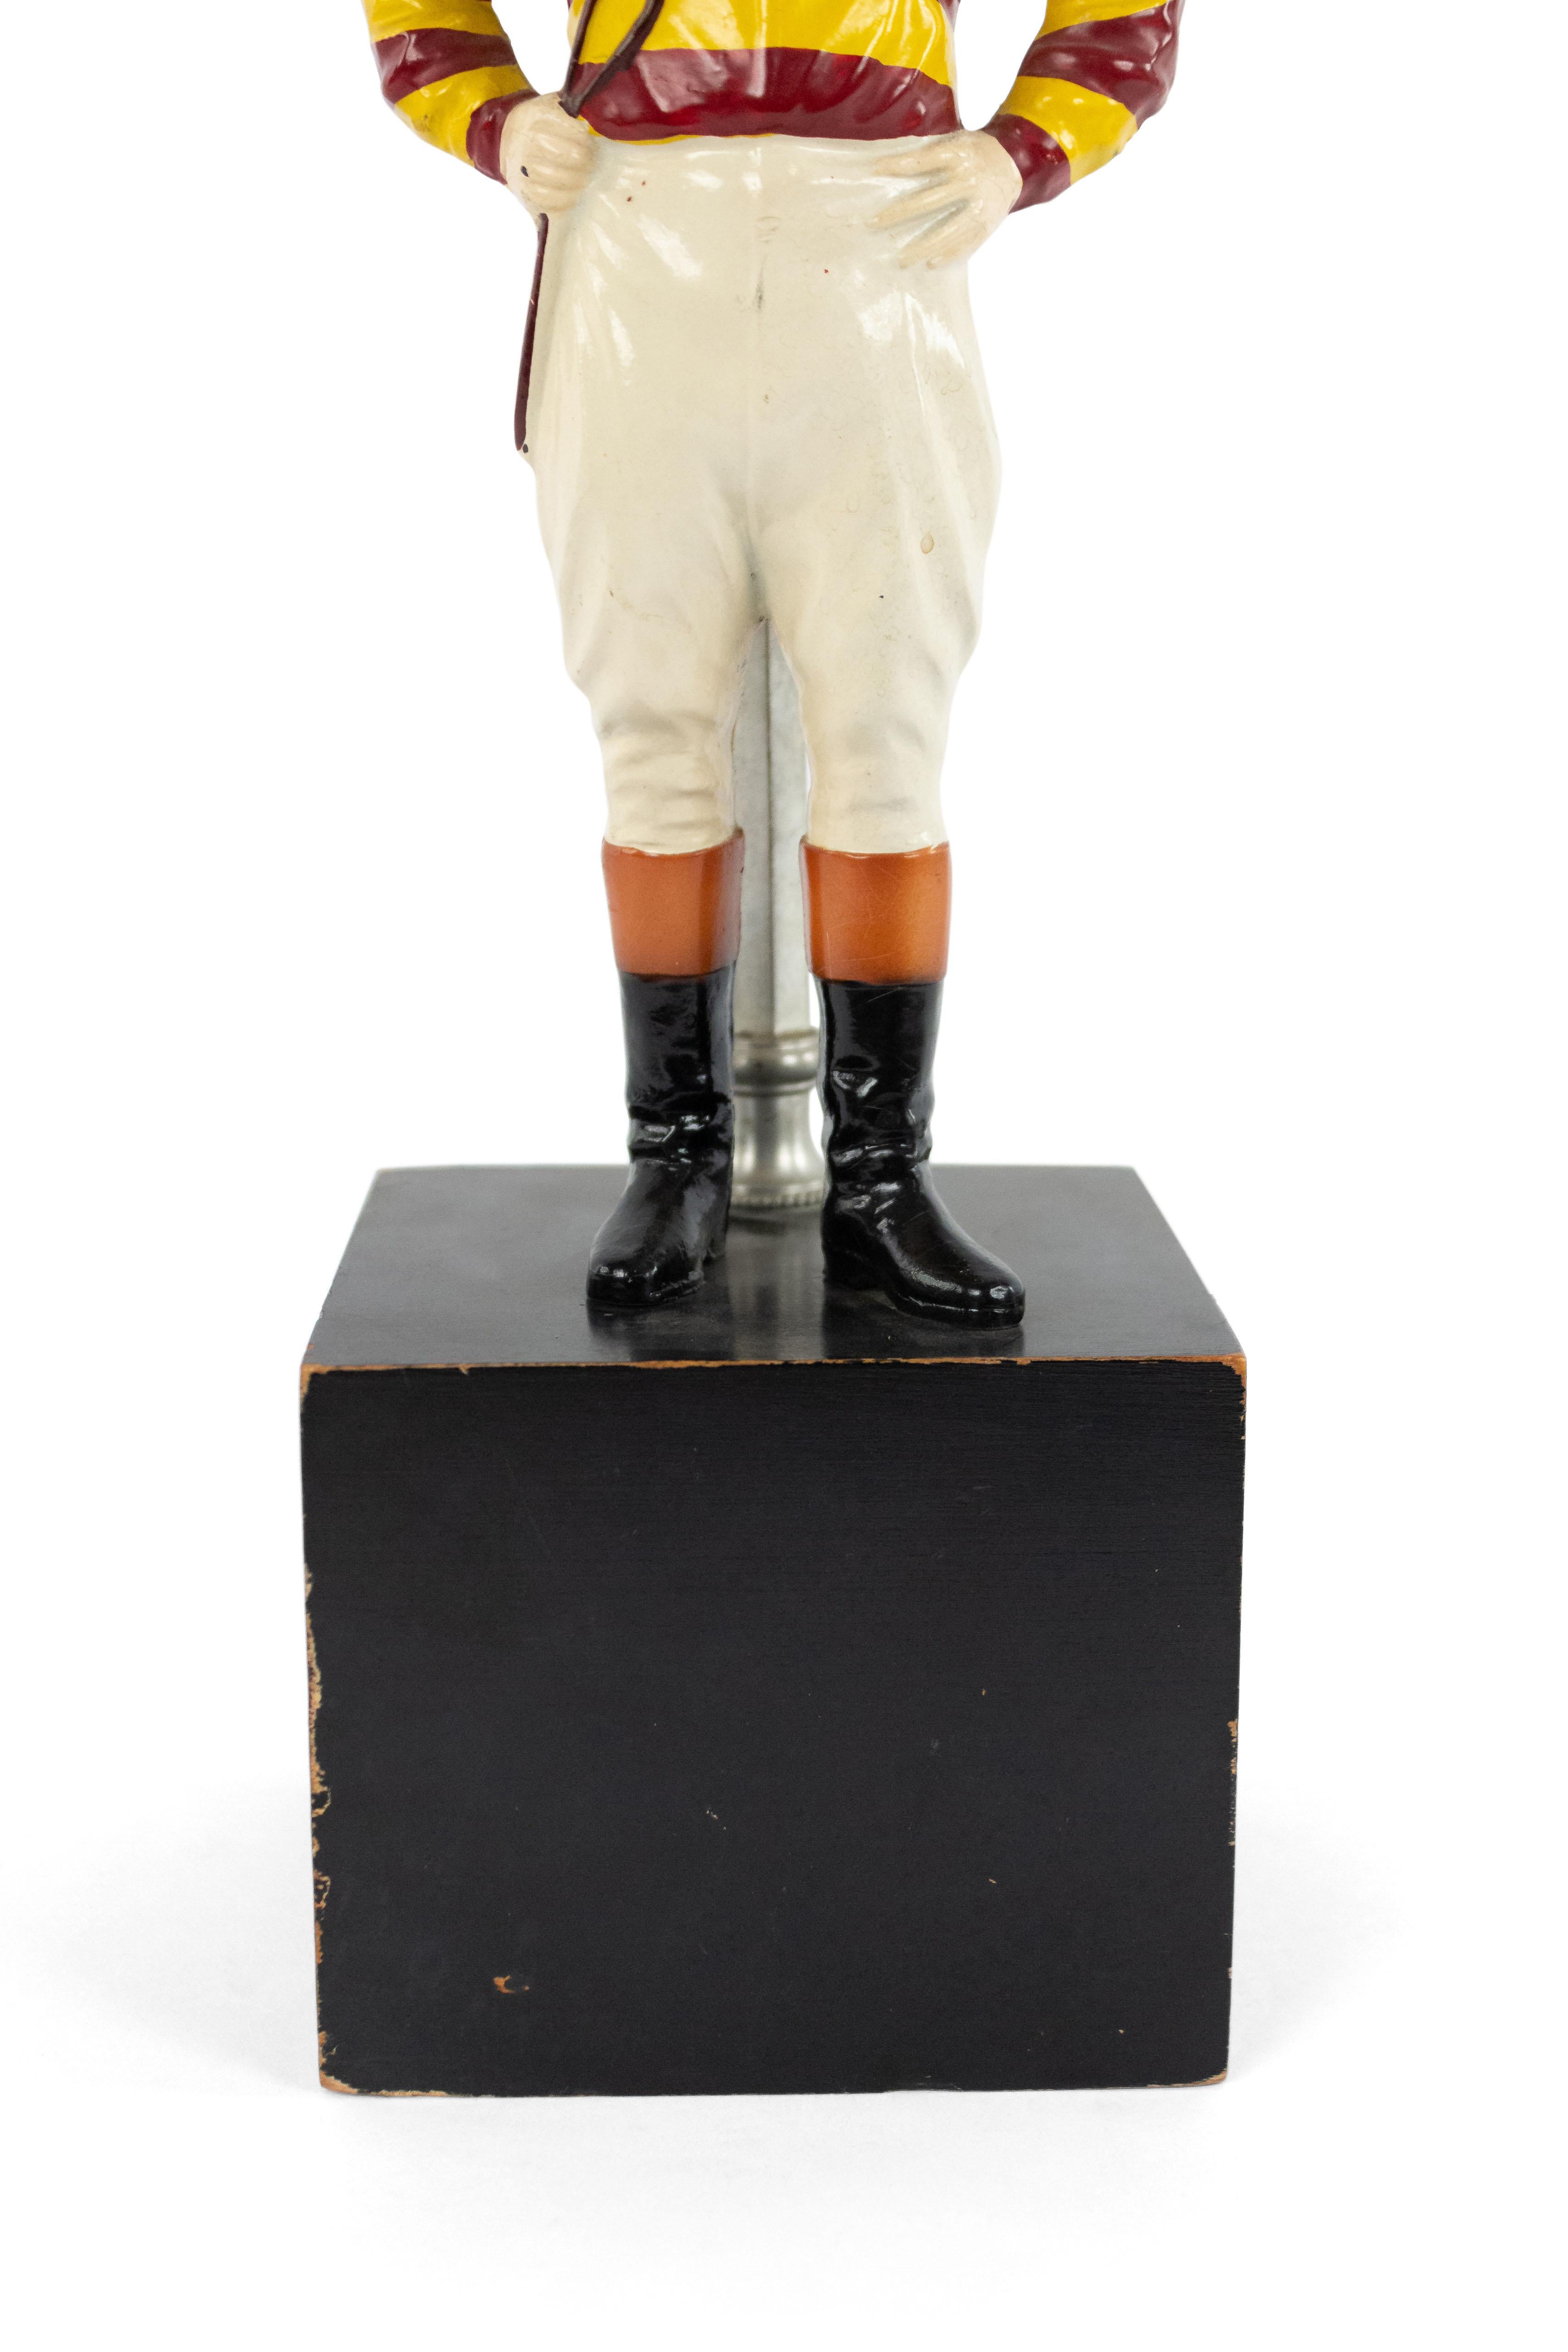 American 1940s painted metal table lamp with jockey figure standing on ebonized square wood base with horseshoe finial.